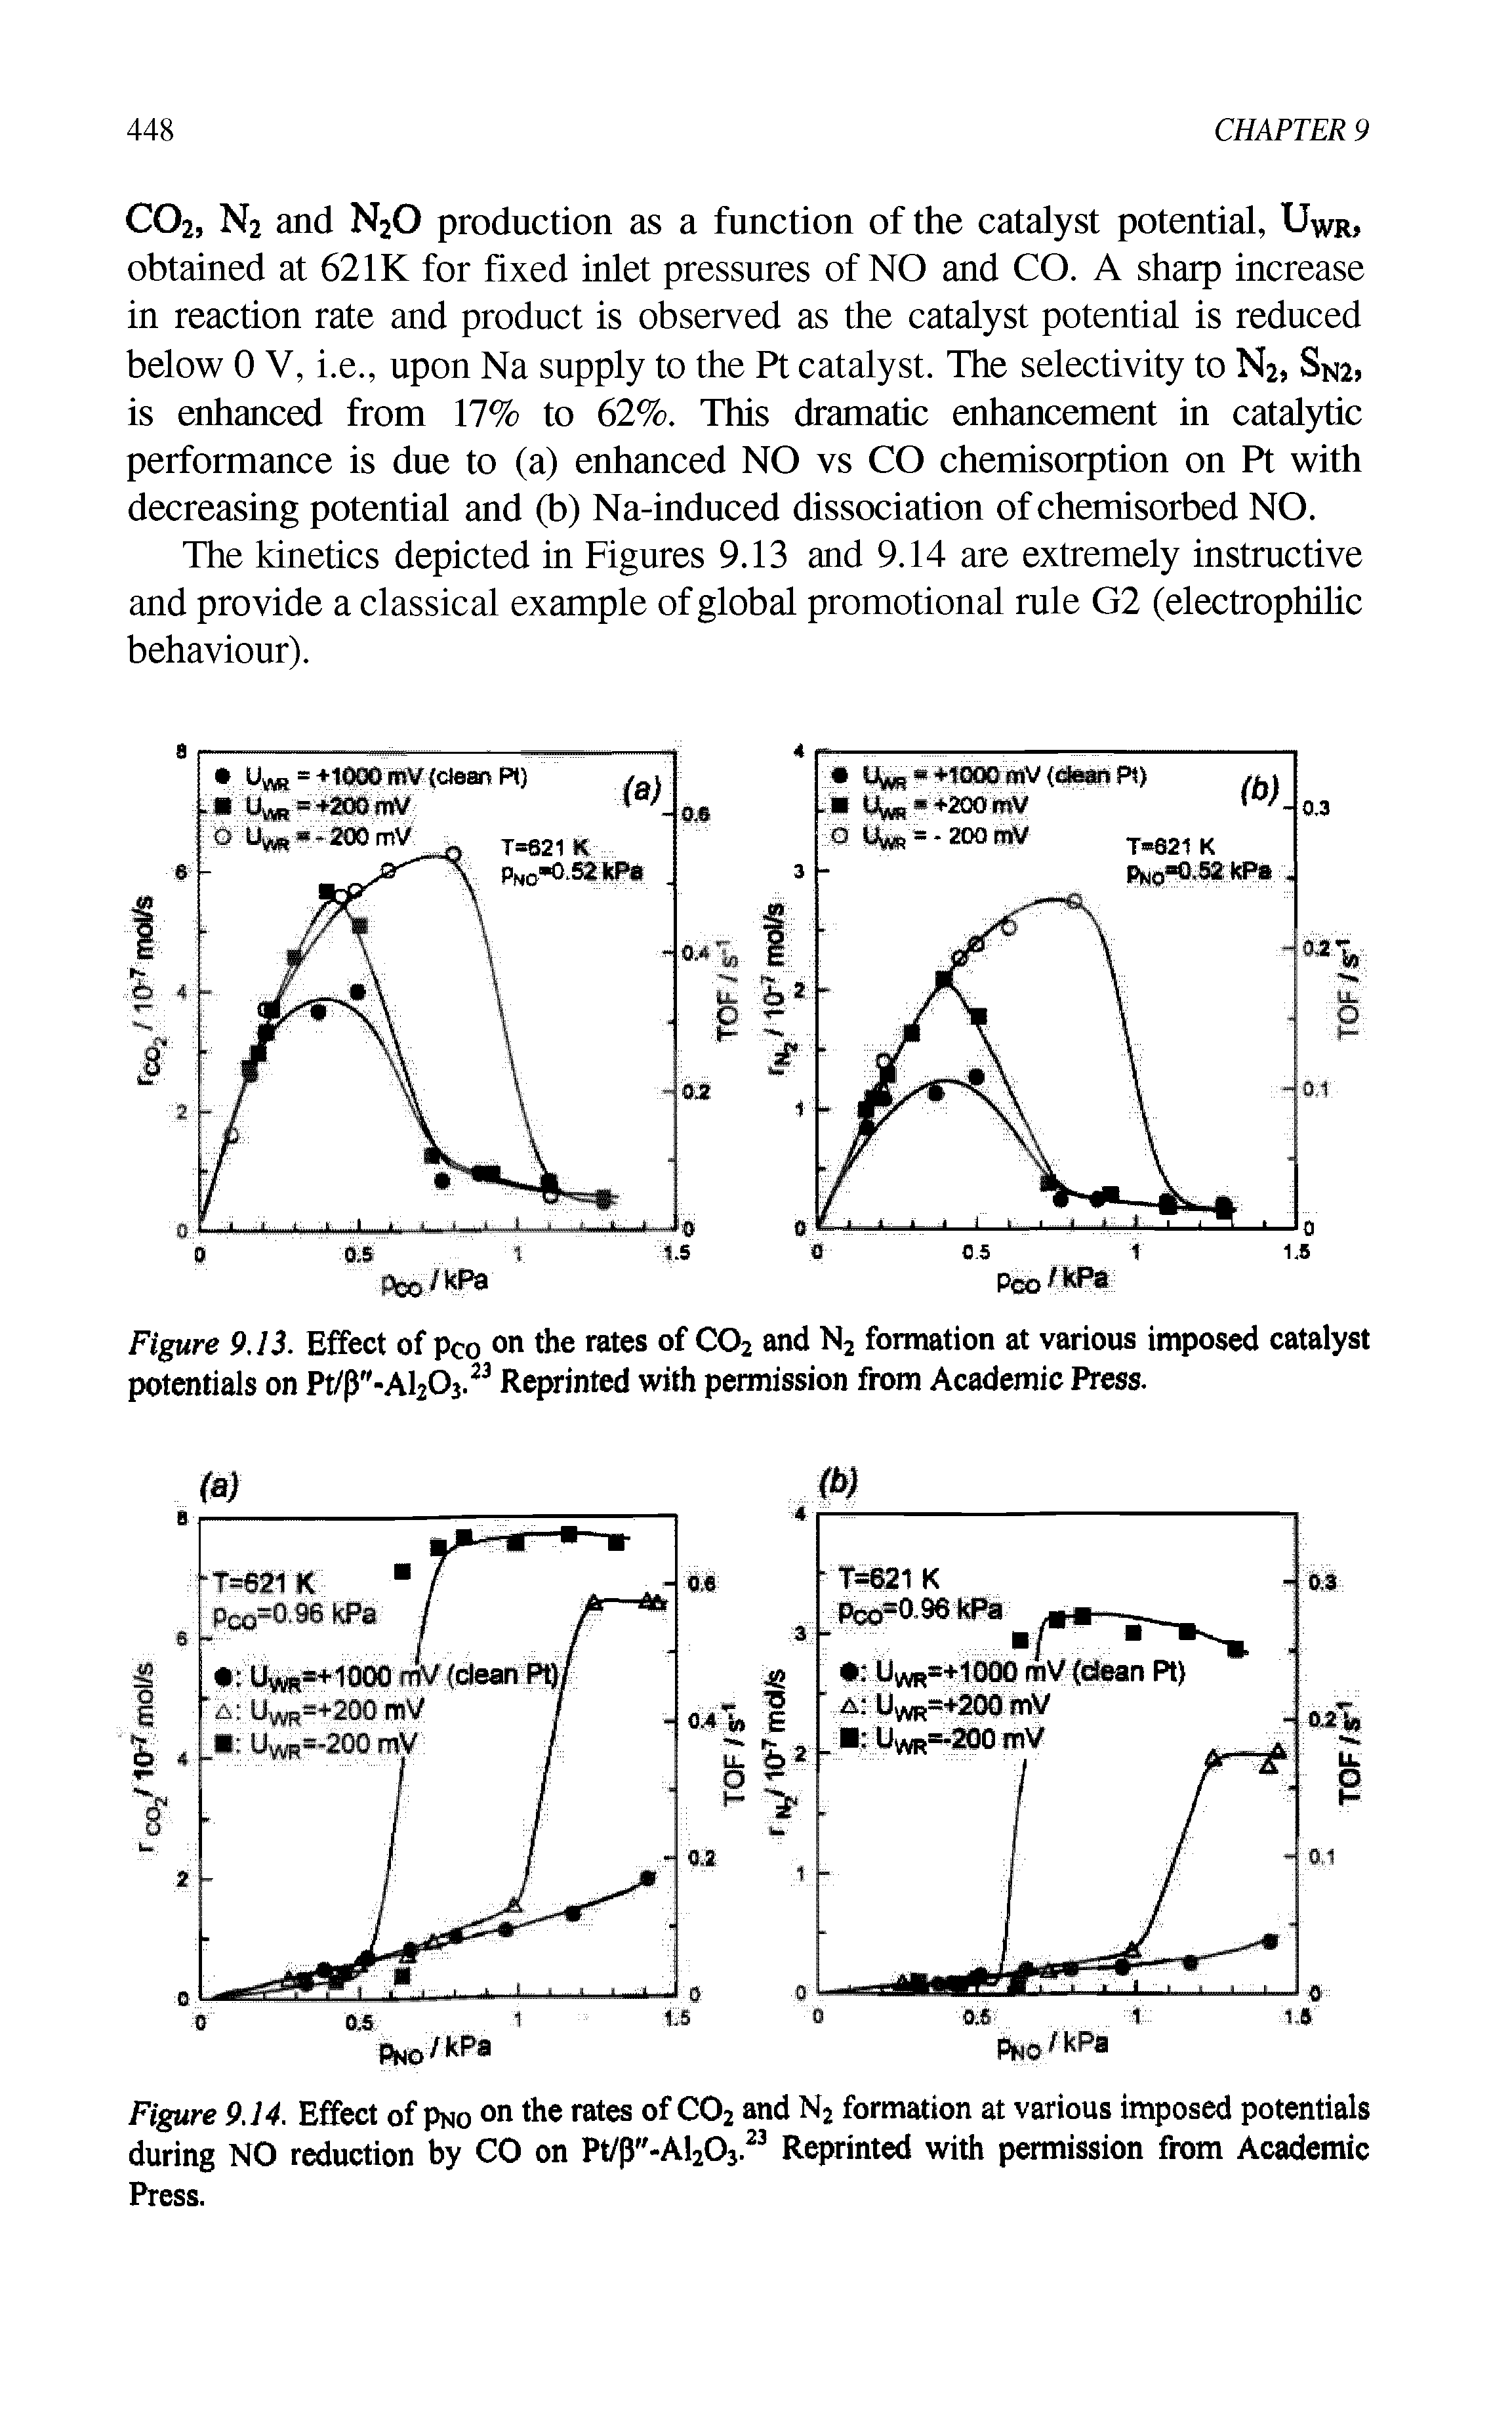 Figure 9.13. Effect of pco on the rates of C02 and N2 formation at various imposed catalyst potentials on Pt/p"-Al203.23 Reprinted with permission from Academic Press.